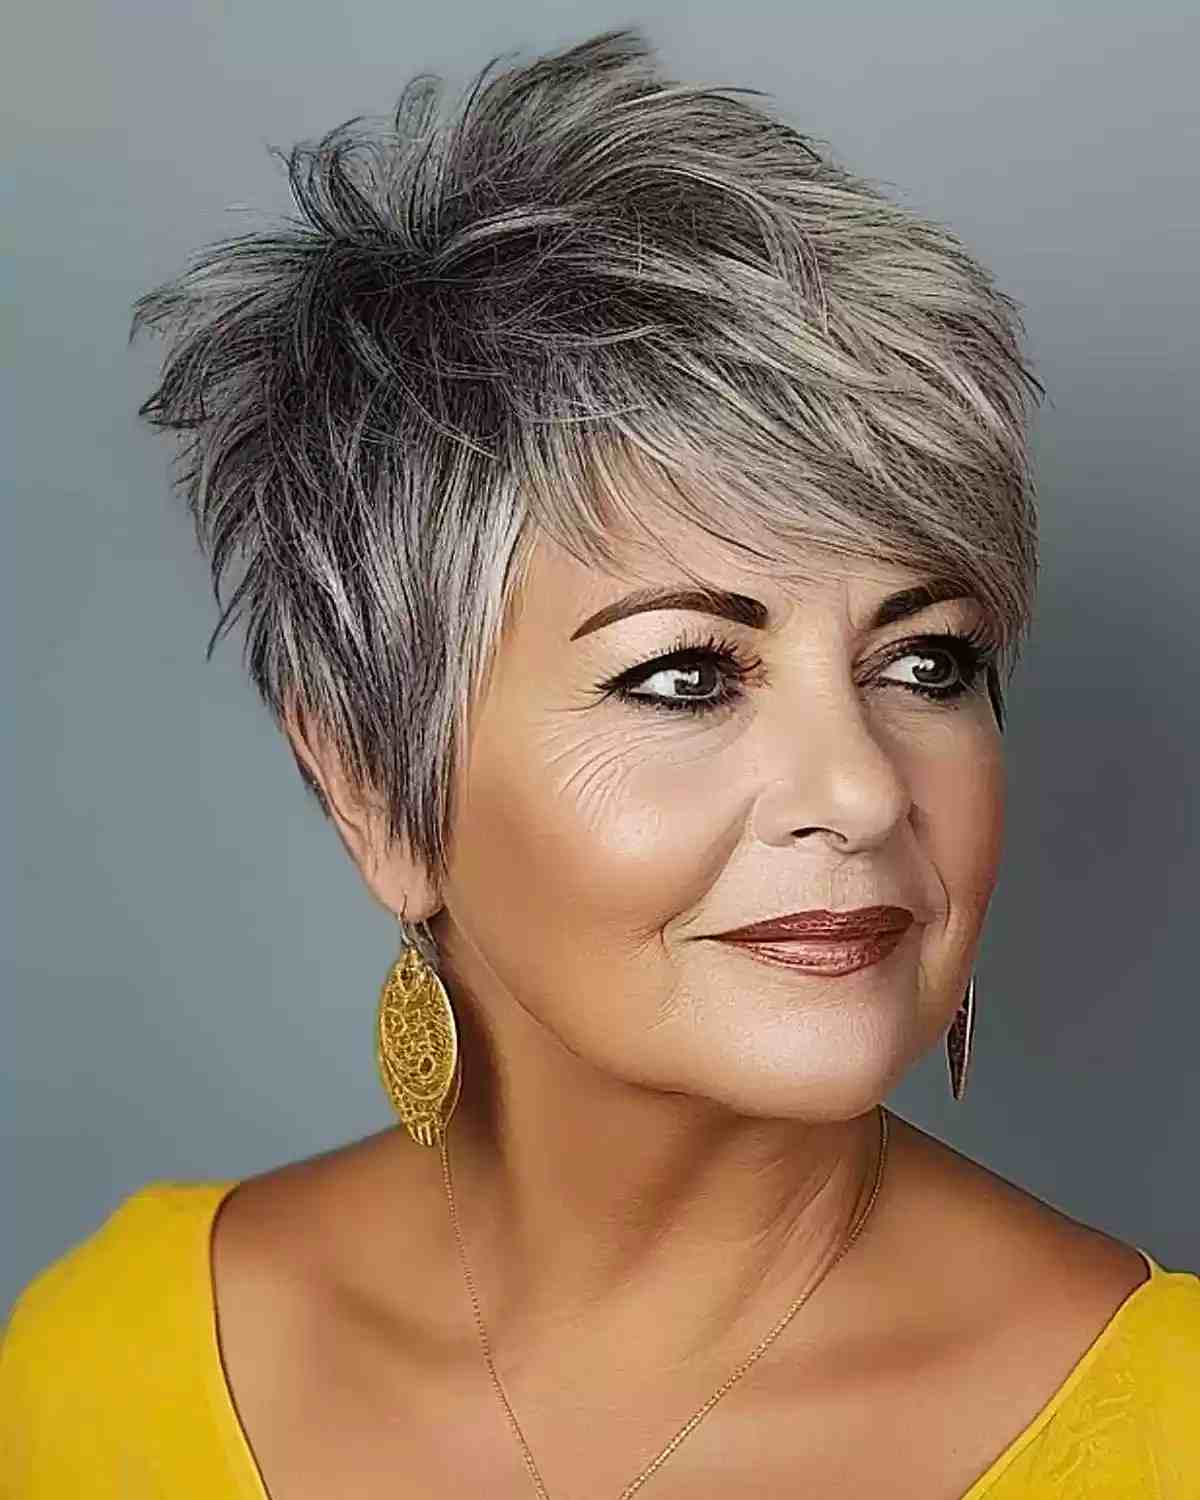 Ageless Pixie Cut with Elegance for a Woman Aged 50